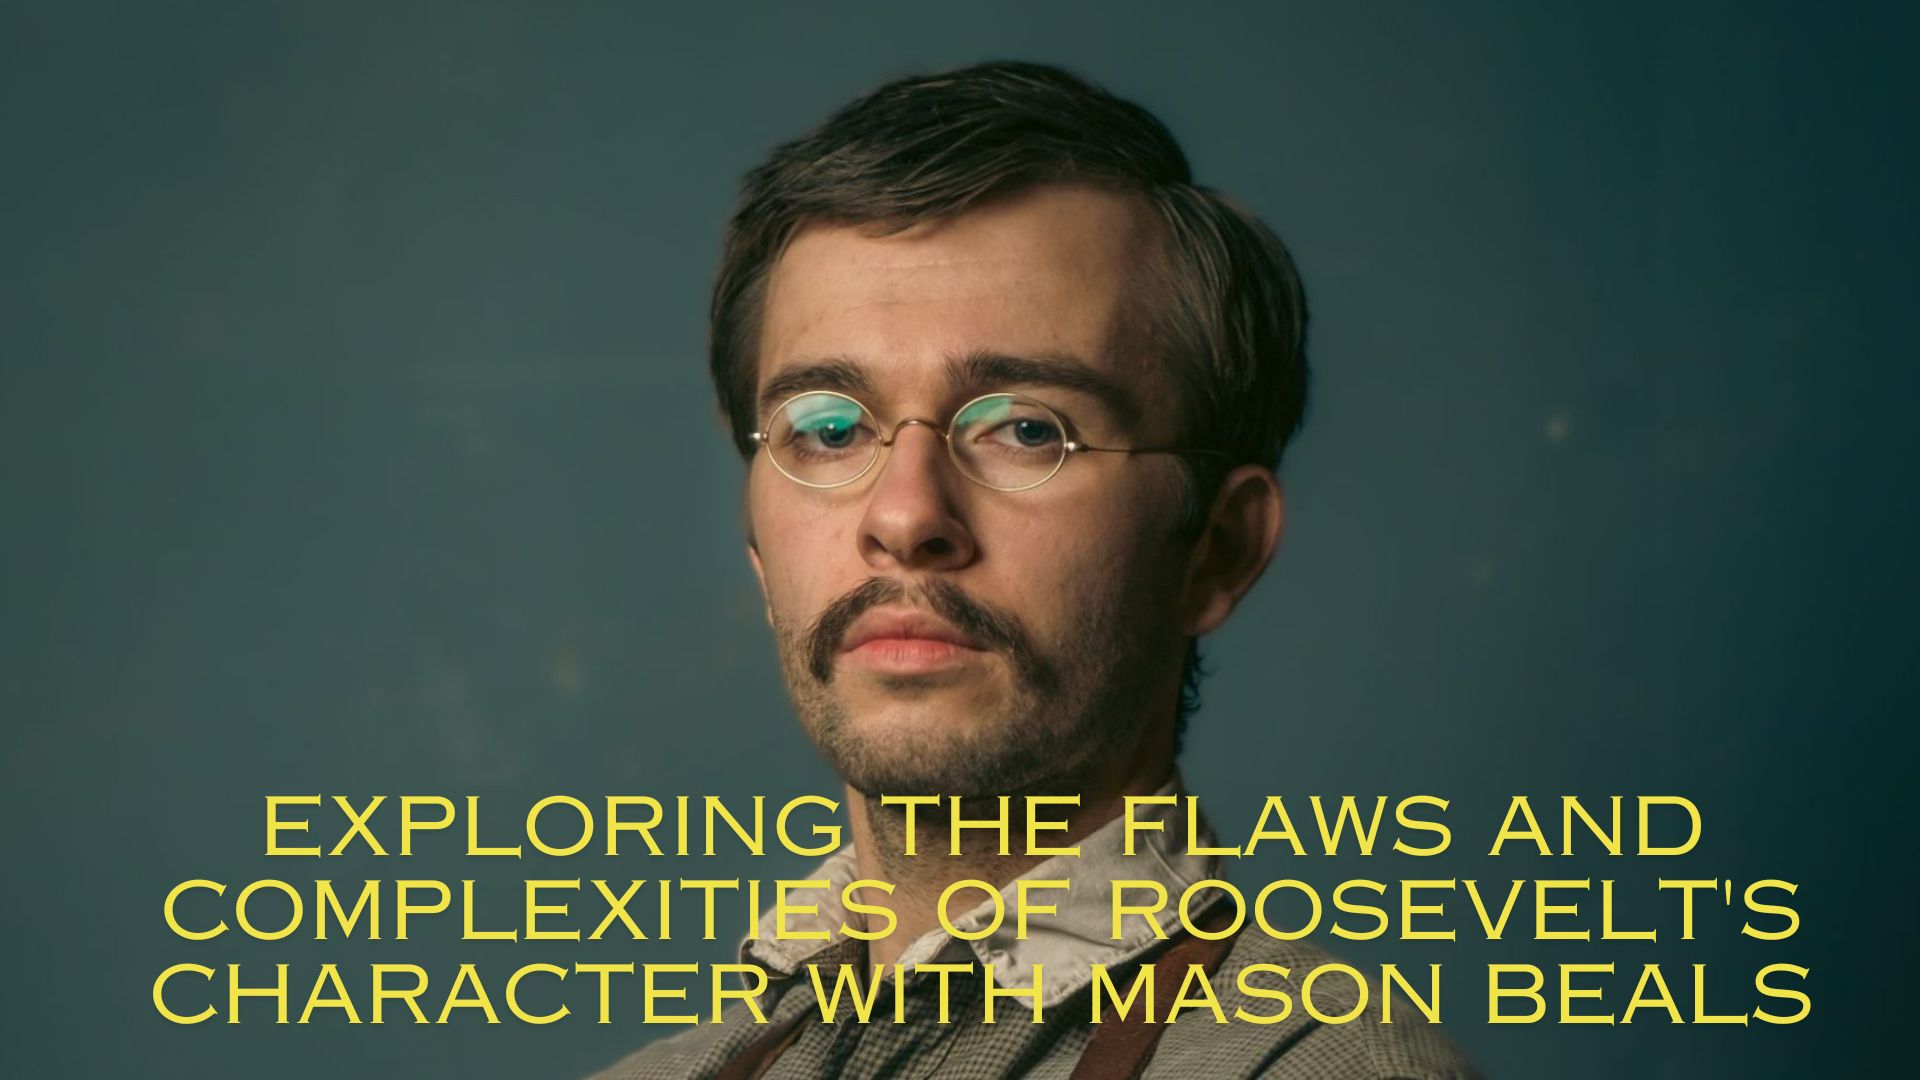 Elkhorn Interview: Exploring the Flaws and Complexities of Roosevelt’s Character with Mason Beals